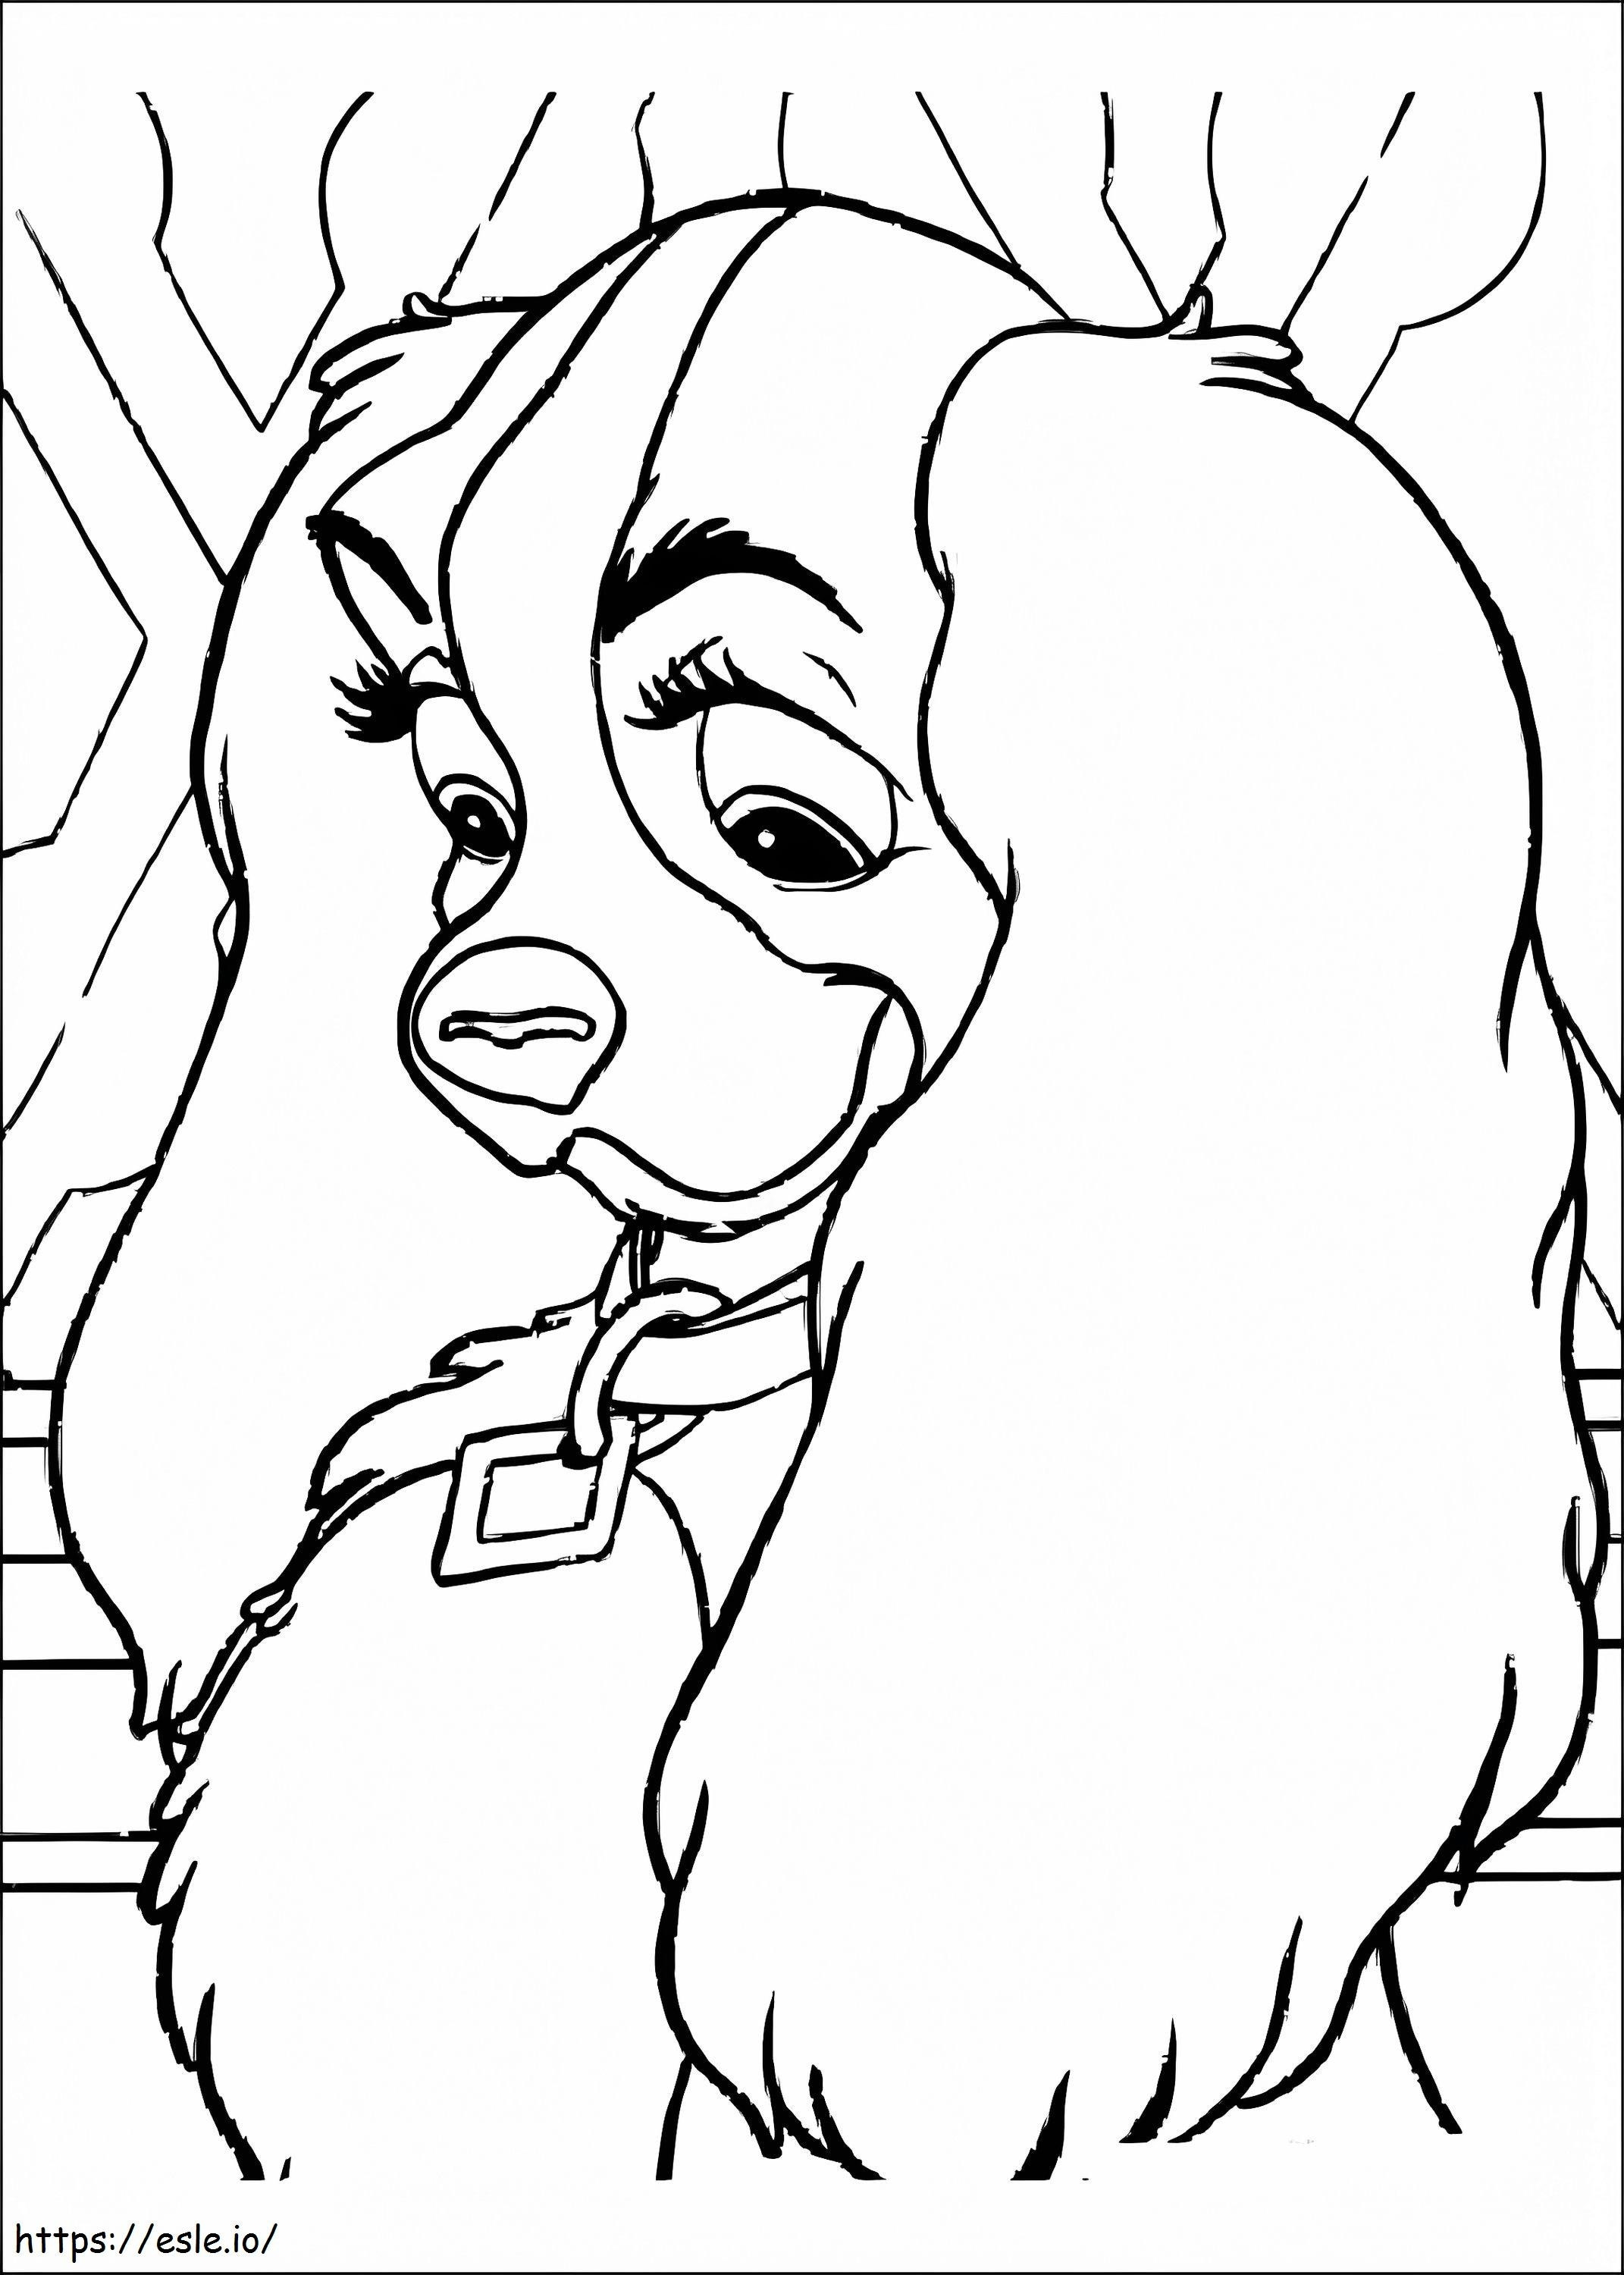 Face Lady Dog Wearing Collar coloring page